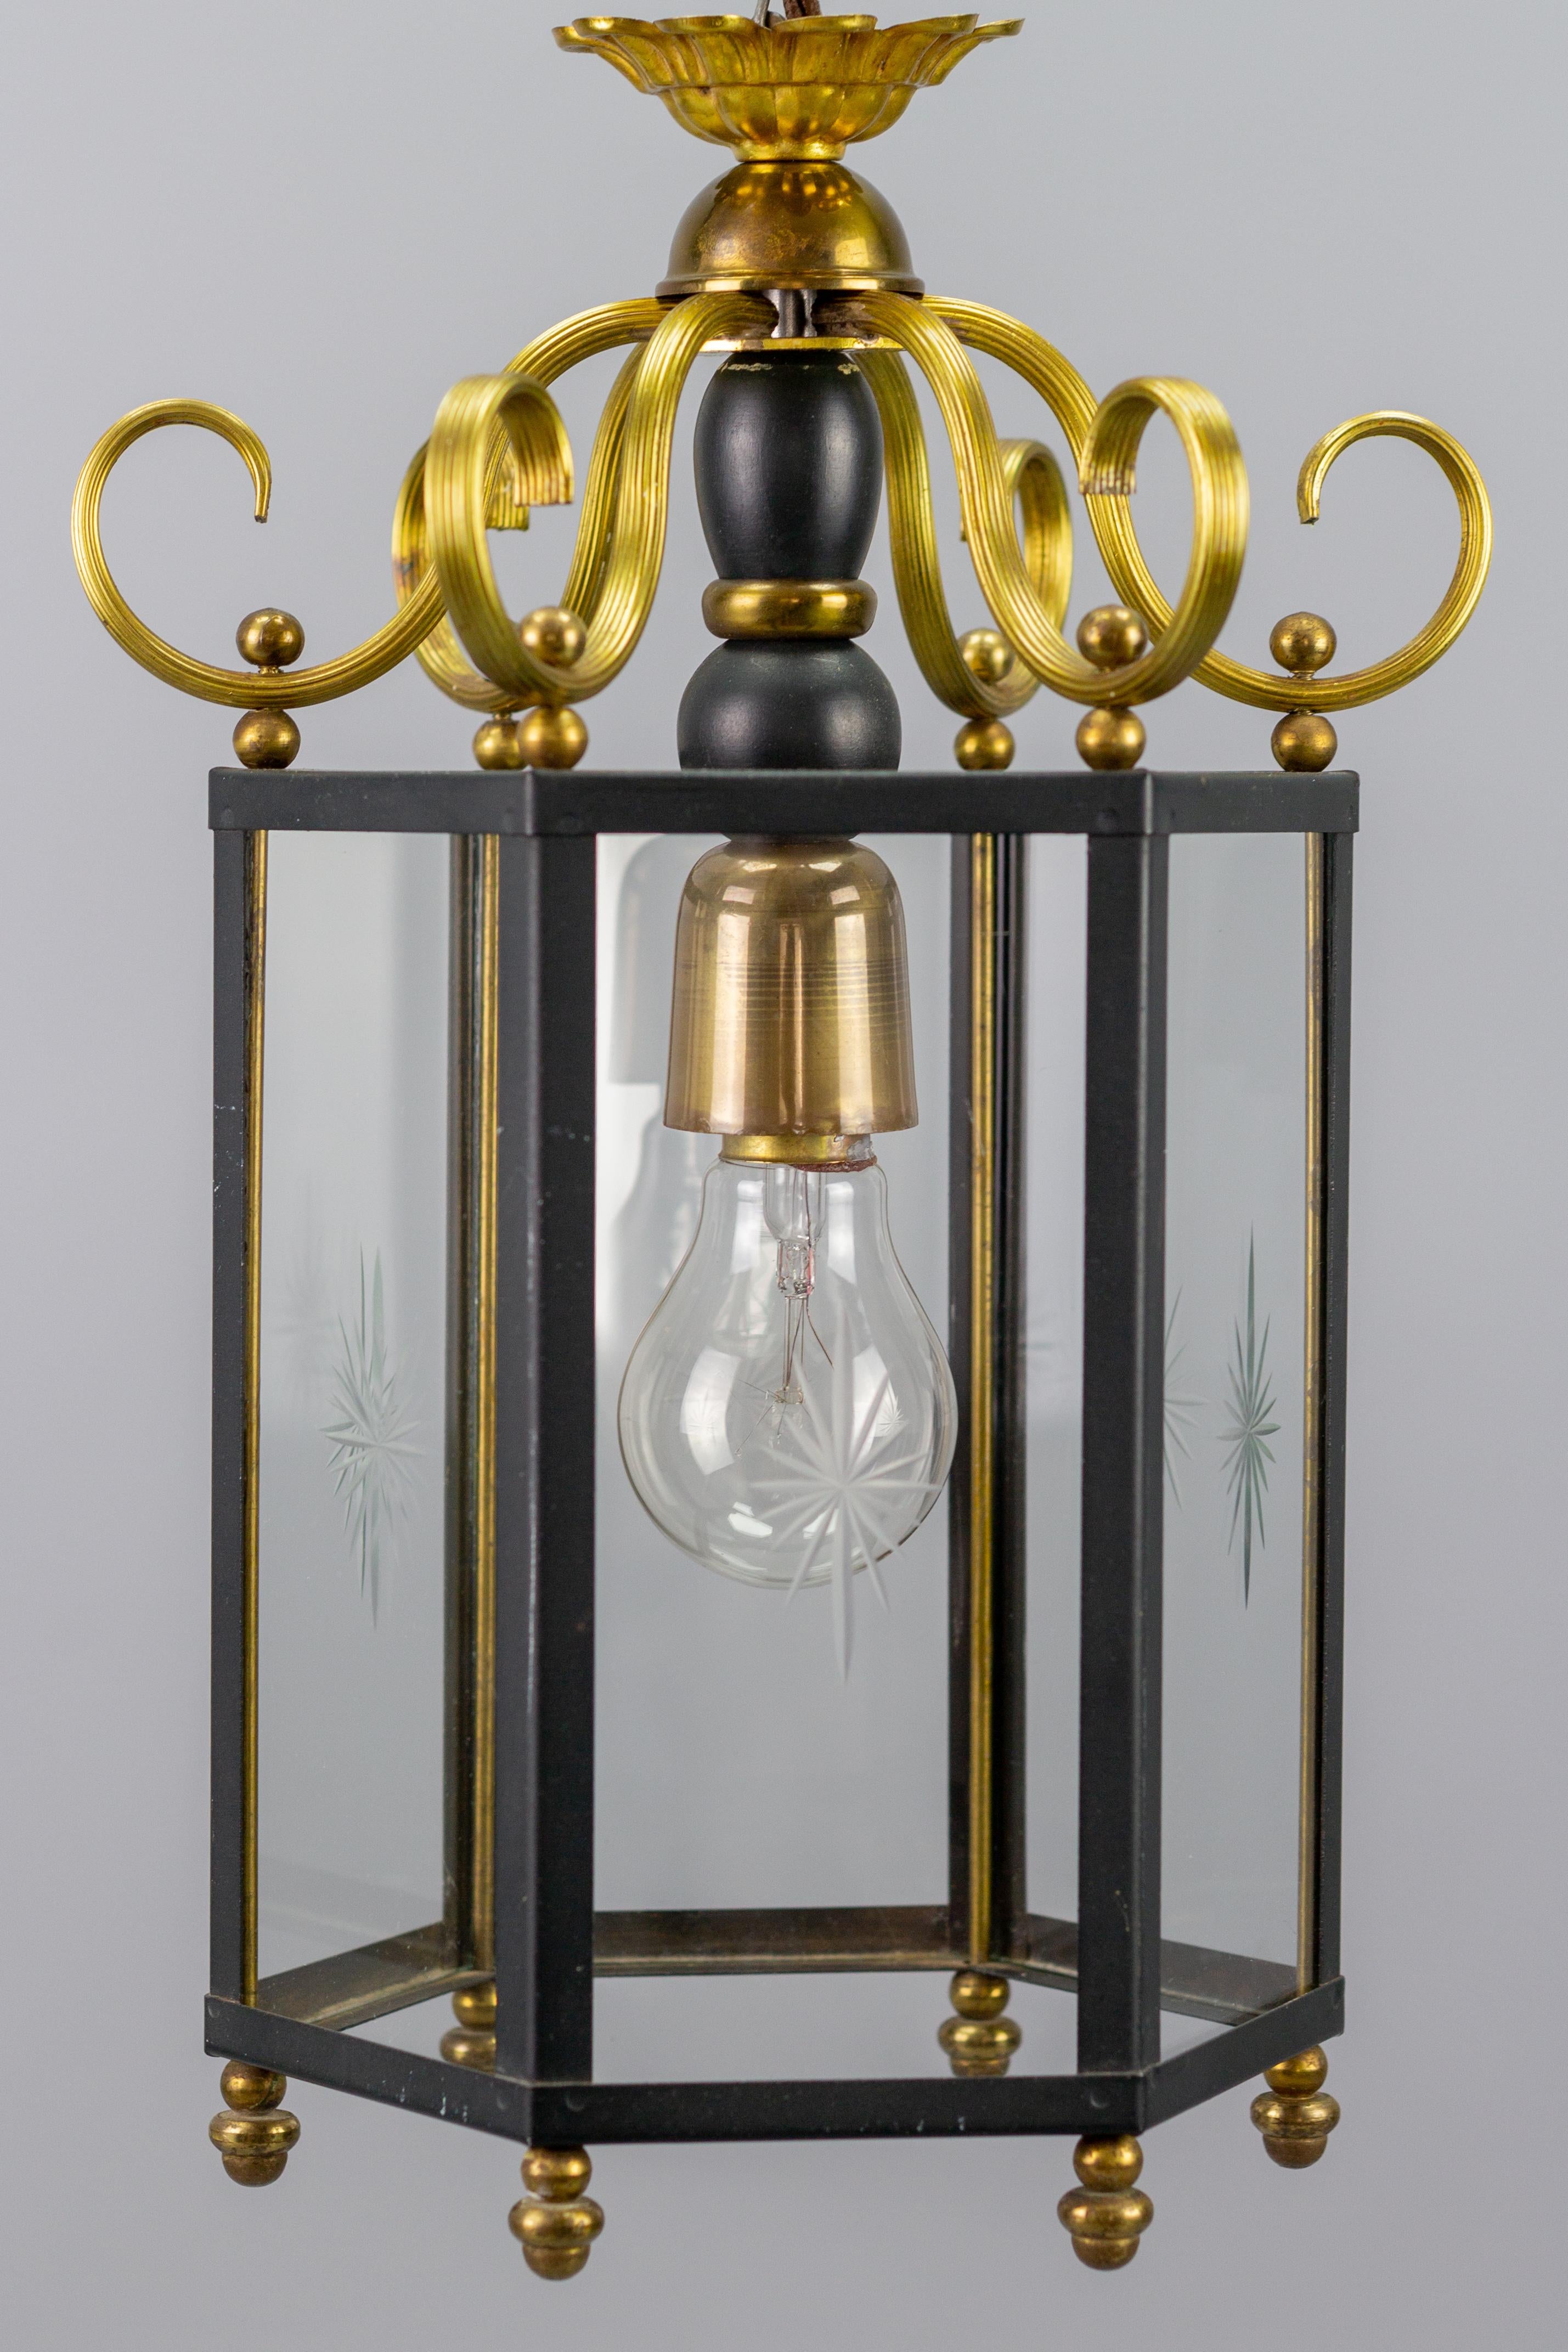 Mid-20th Century Neoclassical Style Brass and Glass Hanging Hall Lantern For Sale